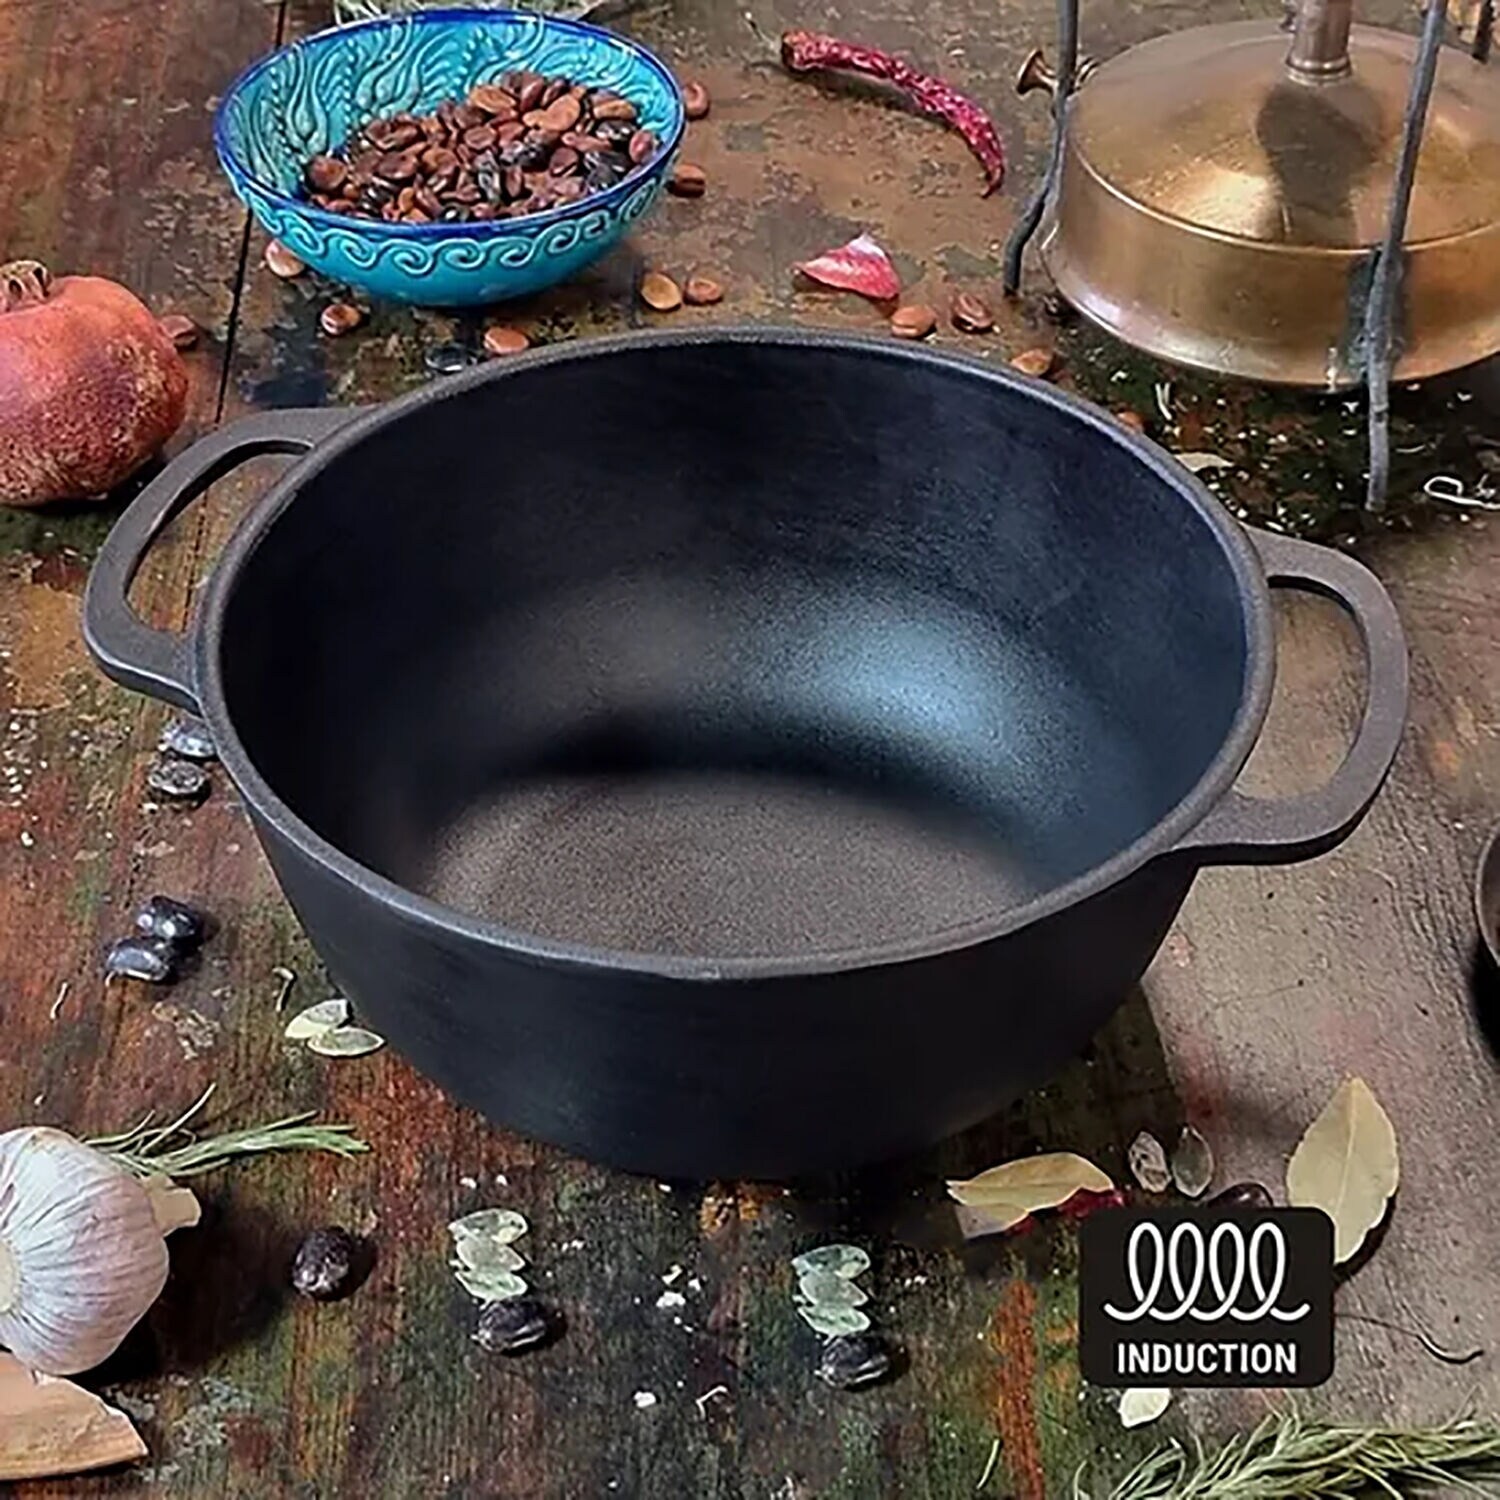 https://ak1.ostkcdn.com/images/products/is/images/direct/85a19fafb493a07adf579fec4ca6ca8468576552/Cast-Iron-Brazier-Pot-Pan-with-Glass-Lid.jpg